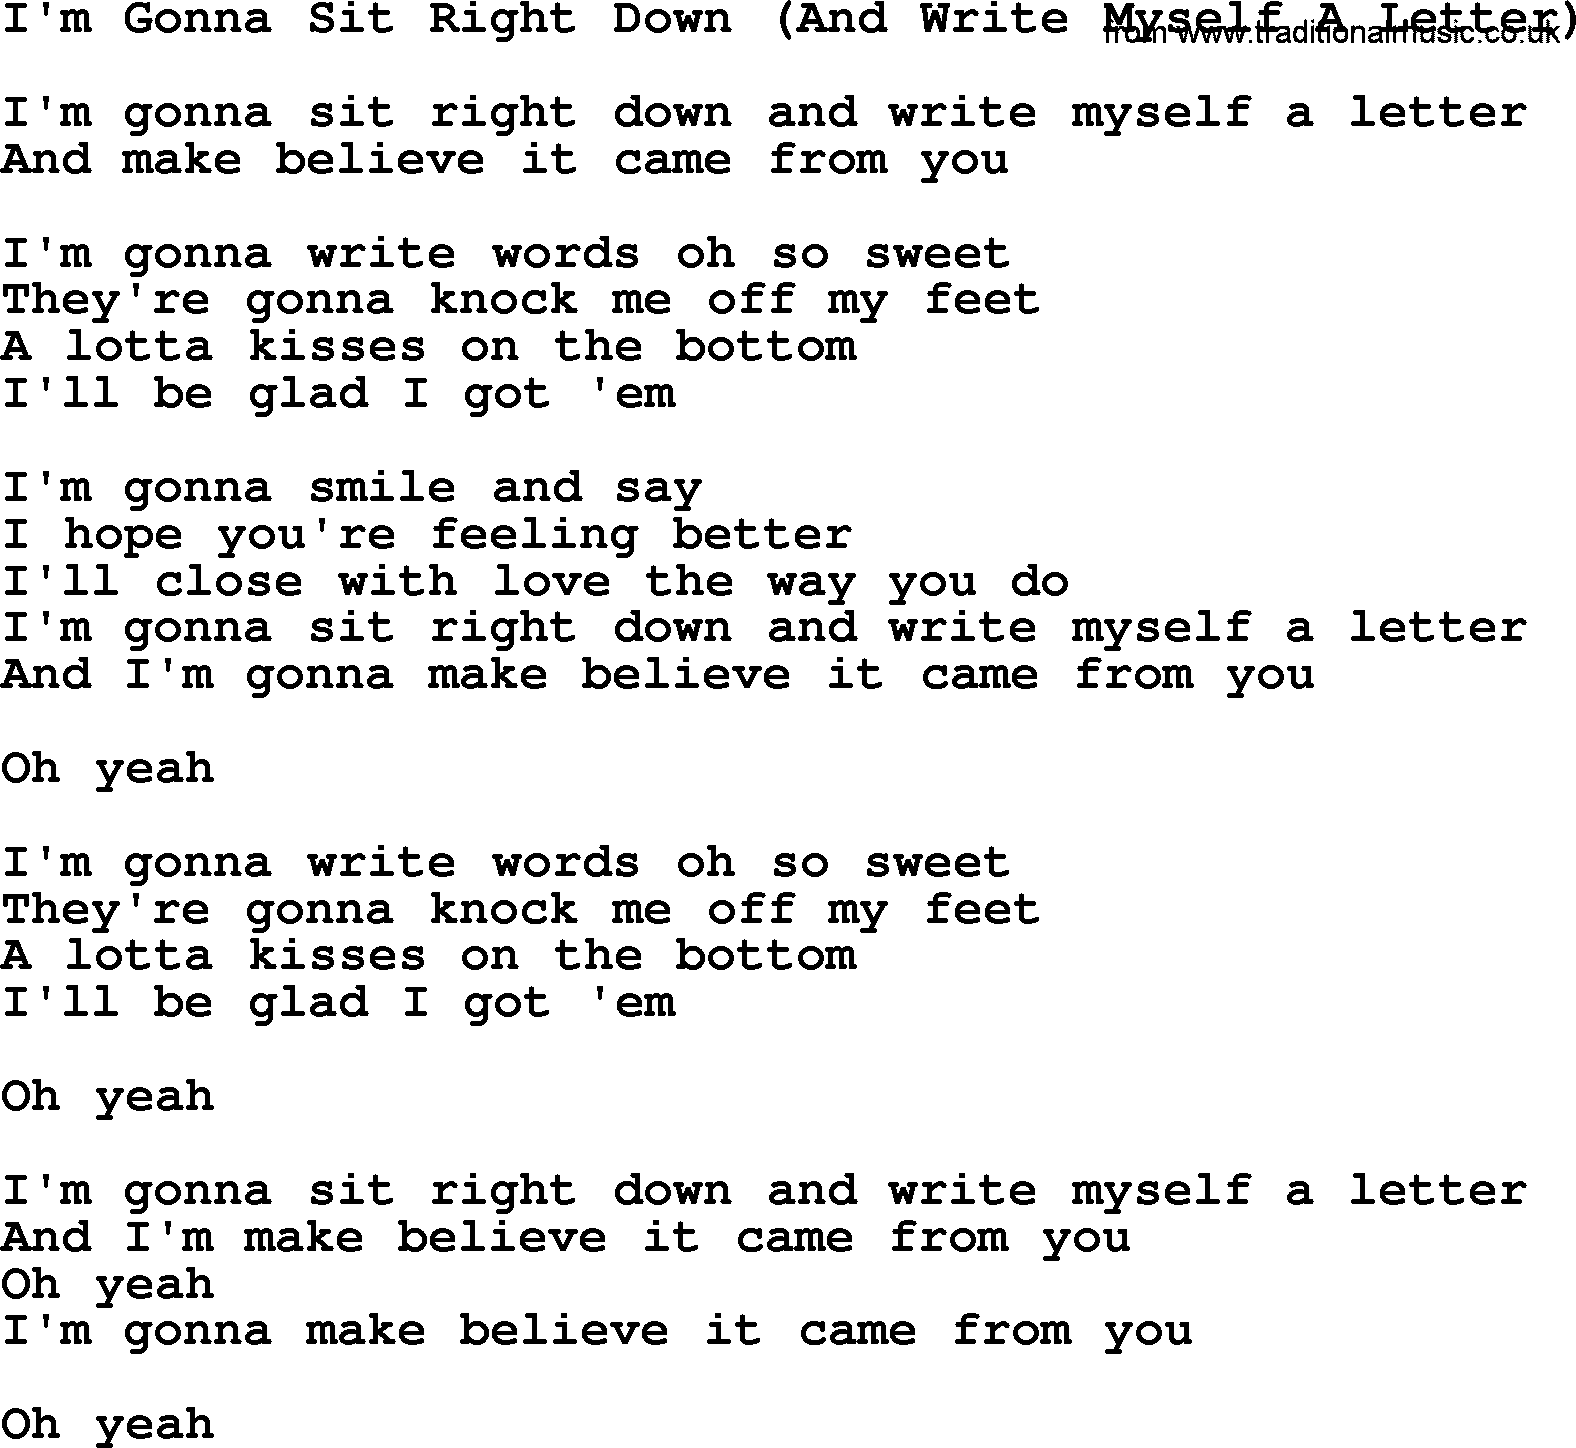 Willie Nelson song: I'm Gonna Sit Right Down (And Write Myself A Letter) lyrics